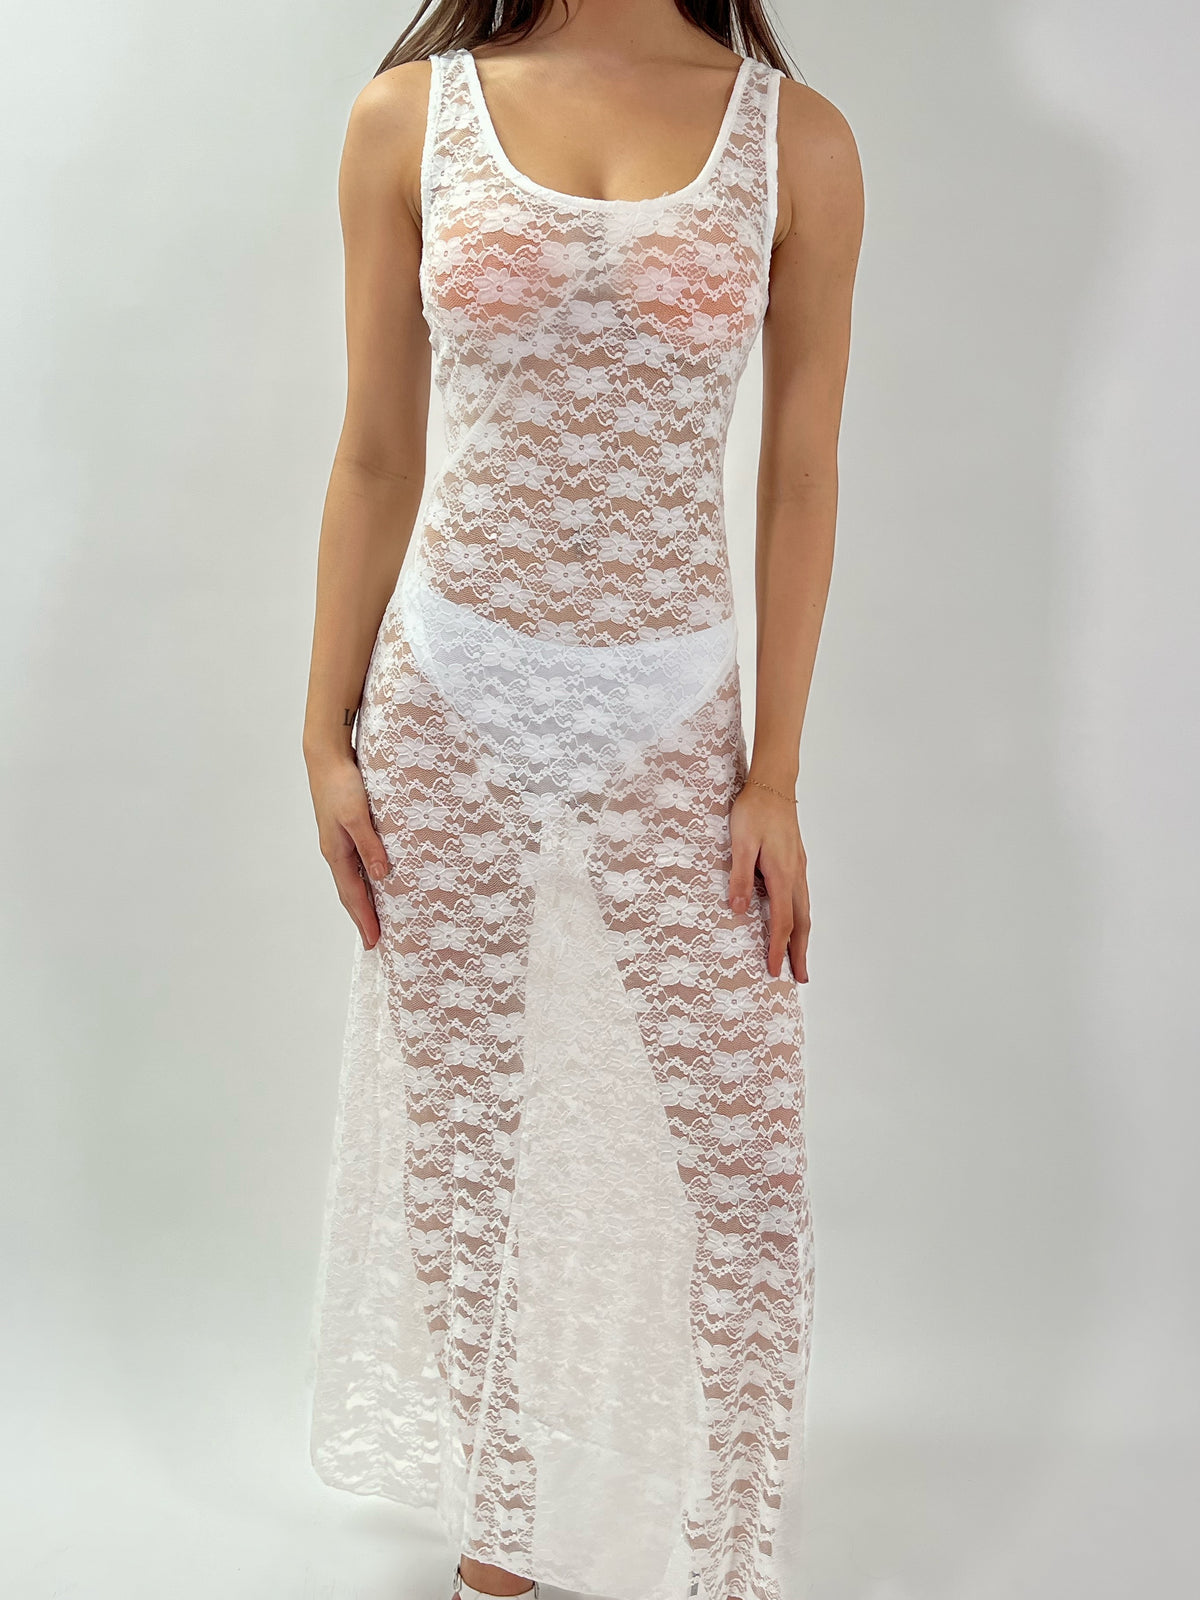 Jessica Sheer Lace Dress (Off White)